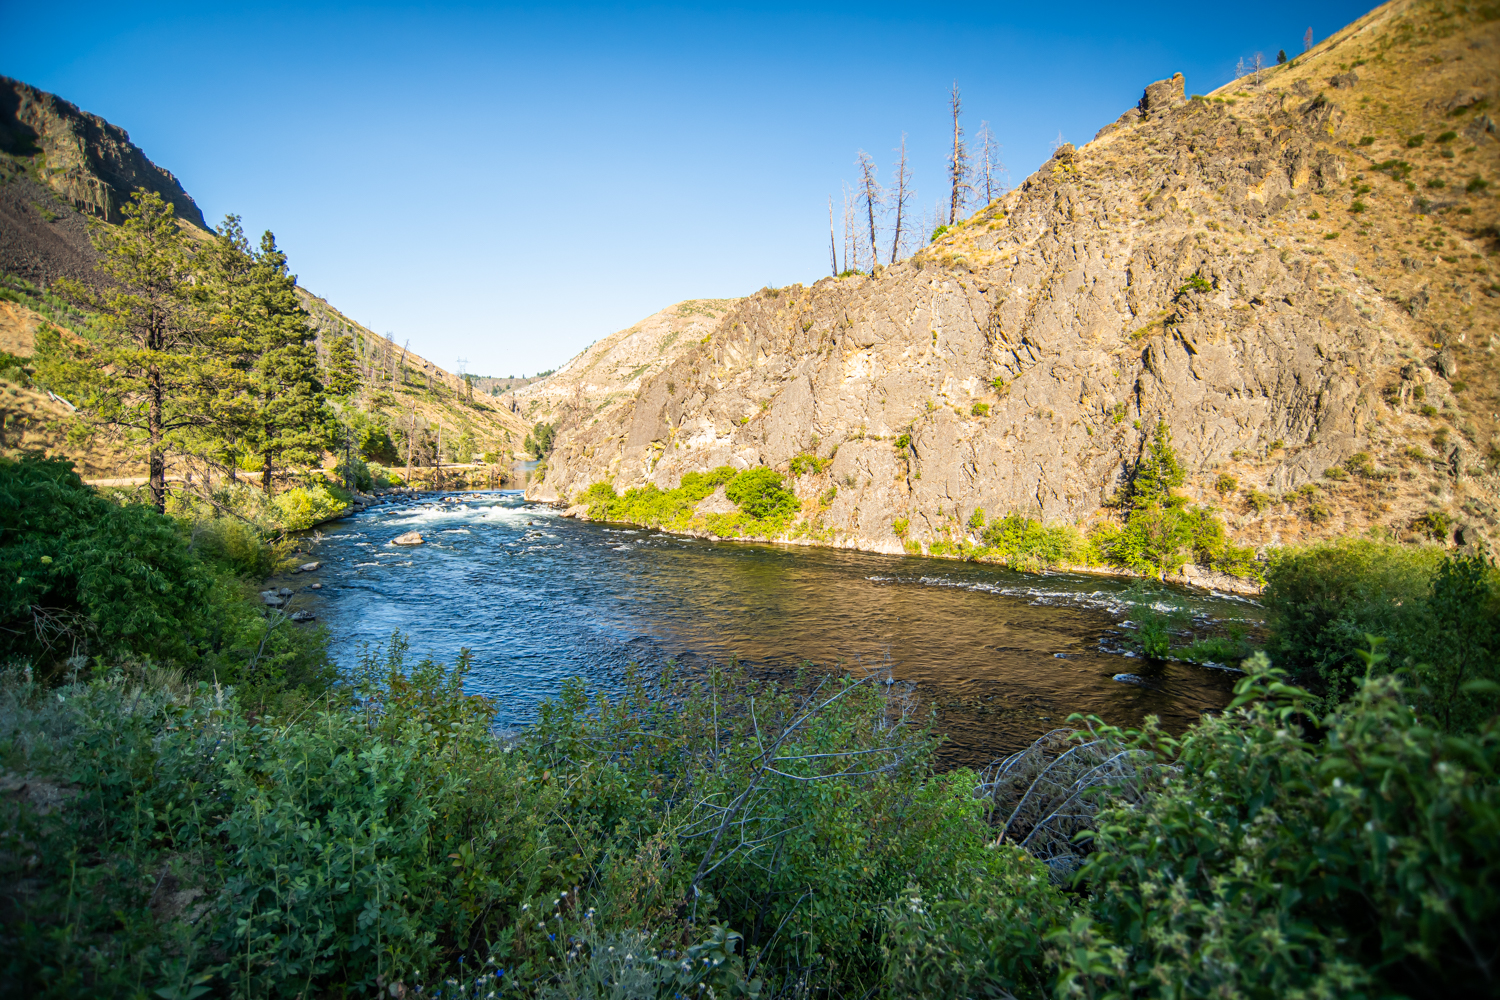 The South Fork of the Boise River below Anderson Ranch Dam in Idaho.